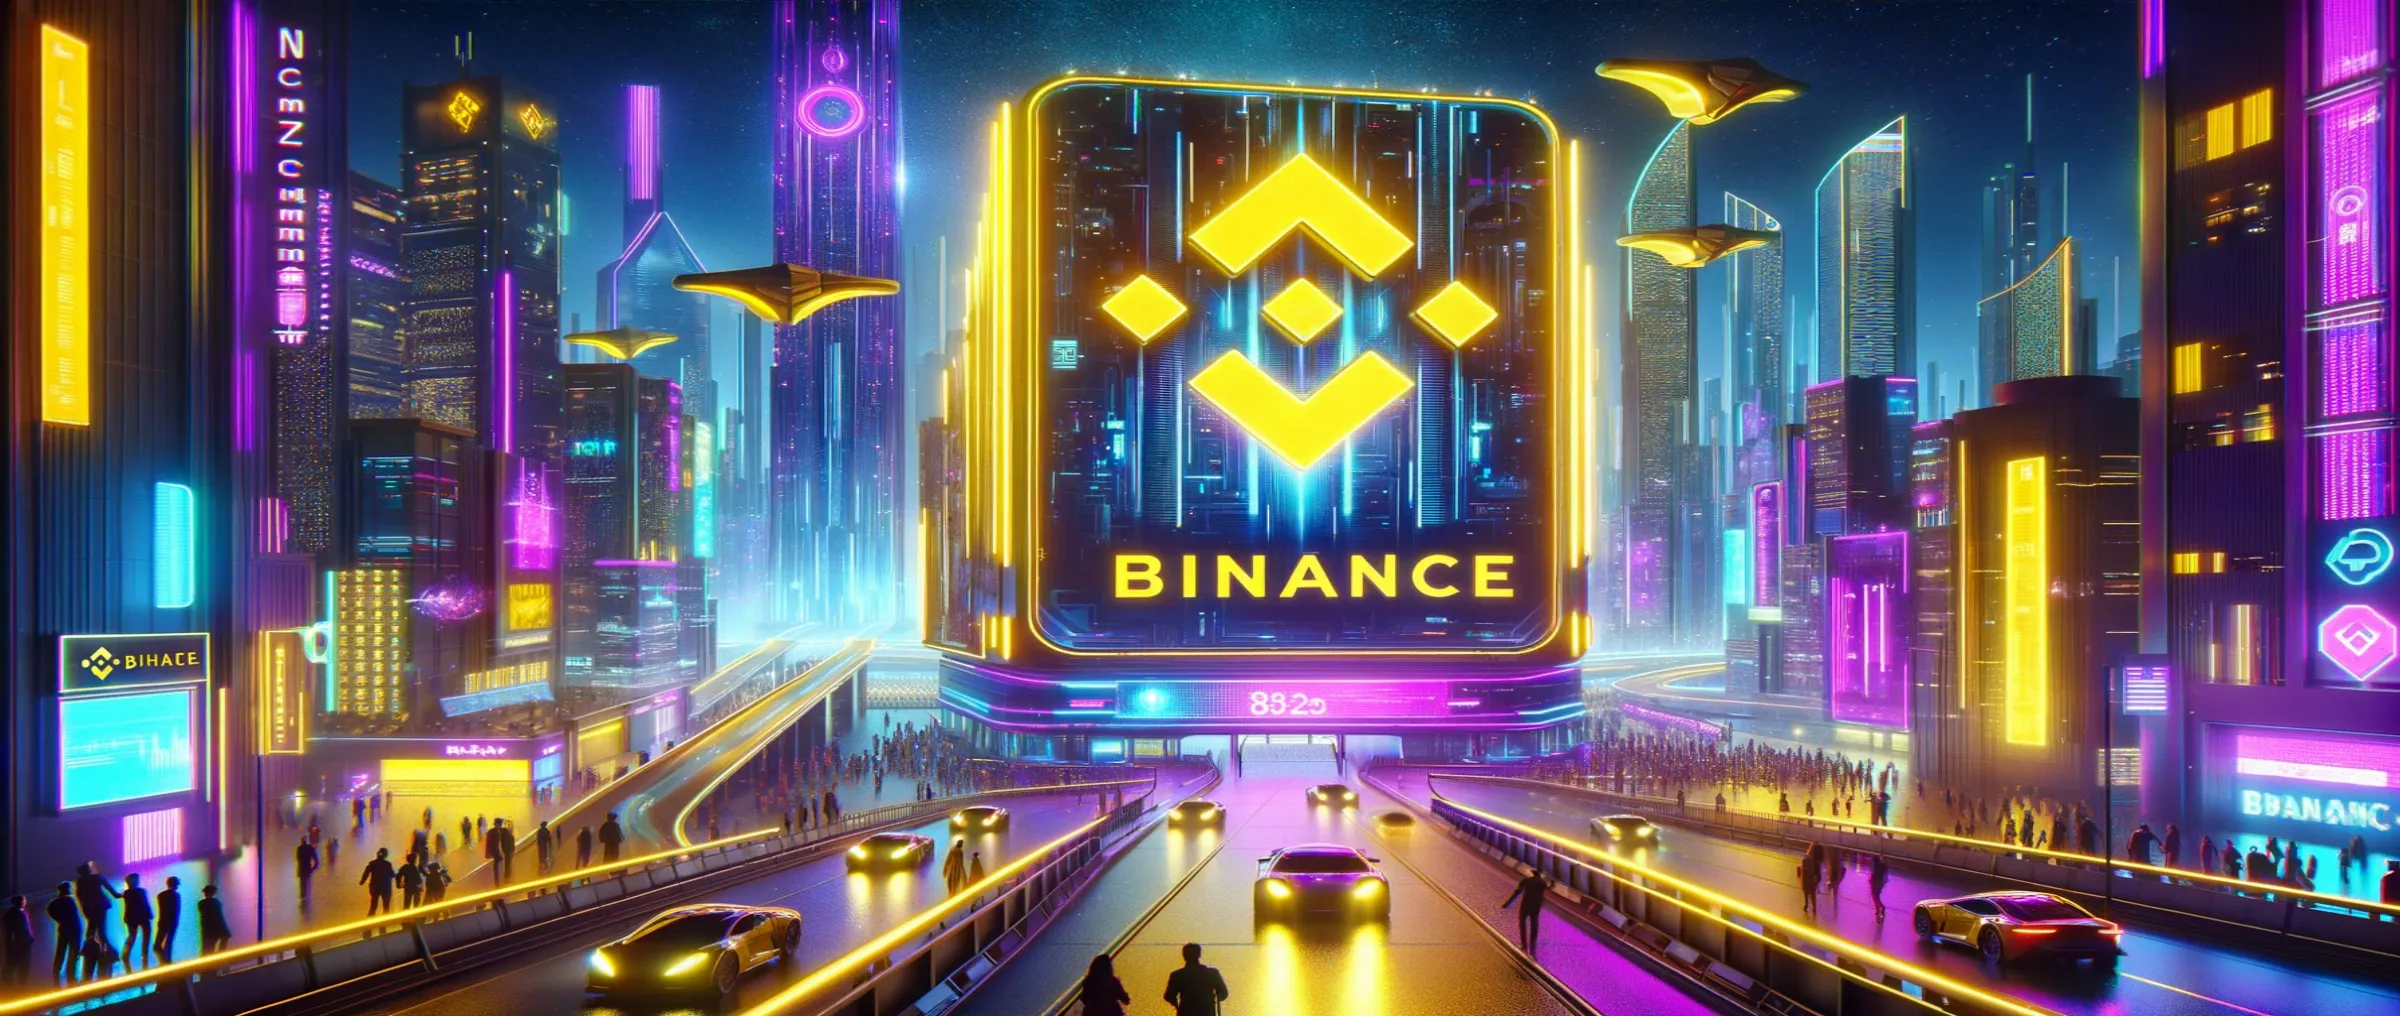 Binance has introduced a platform for trading "inscriptions"